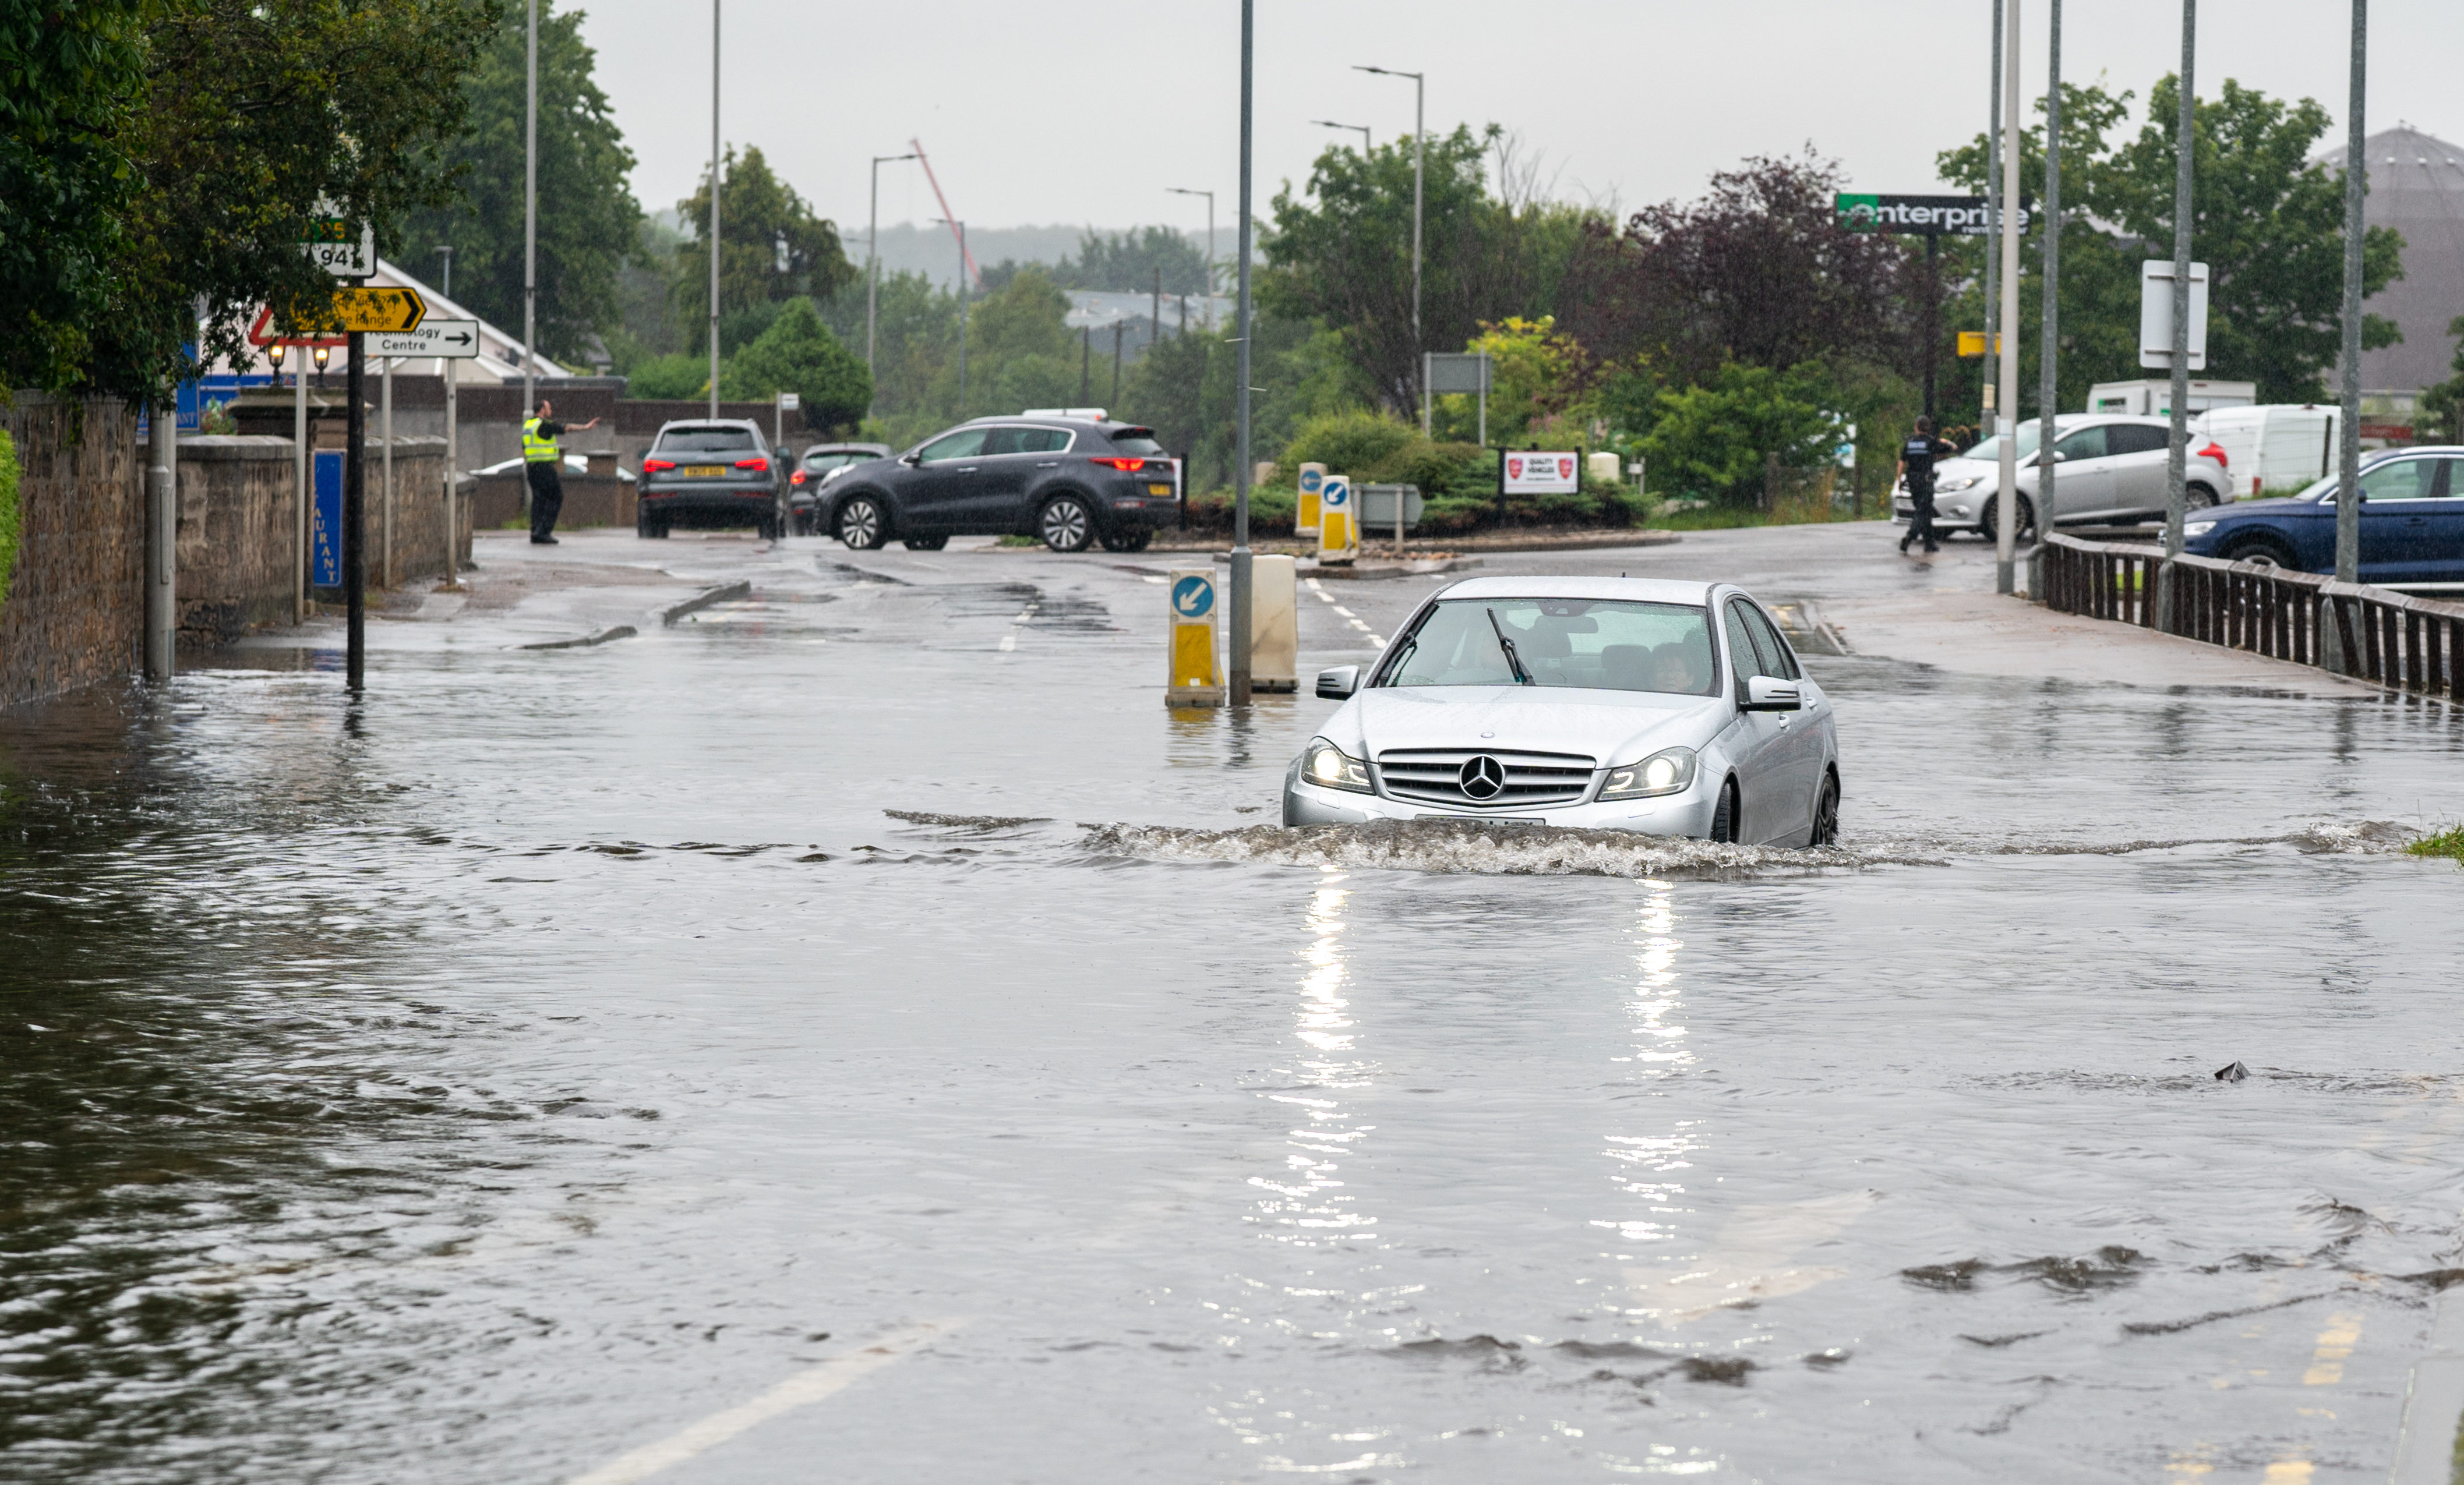 Flooding in Elgin earlier this week. Much of Scotland is braced for more heavy rain over the weekend.